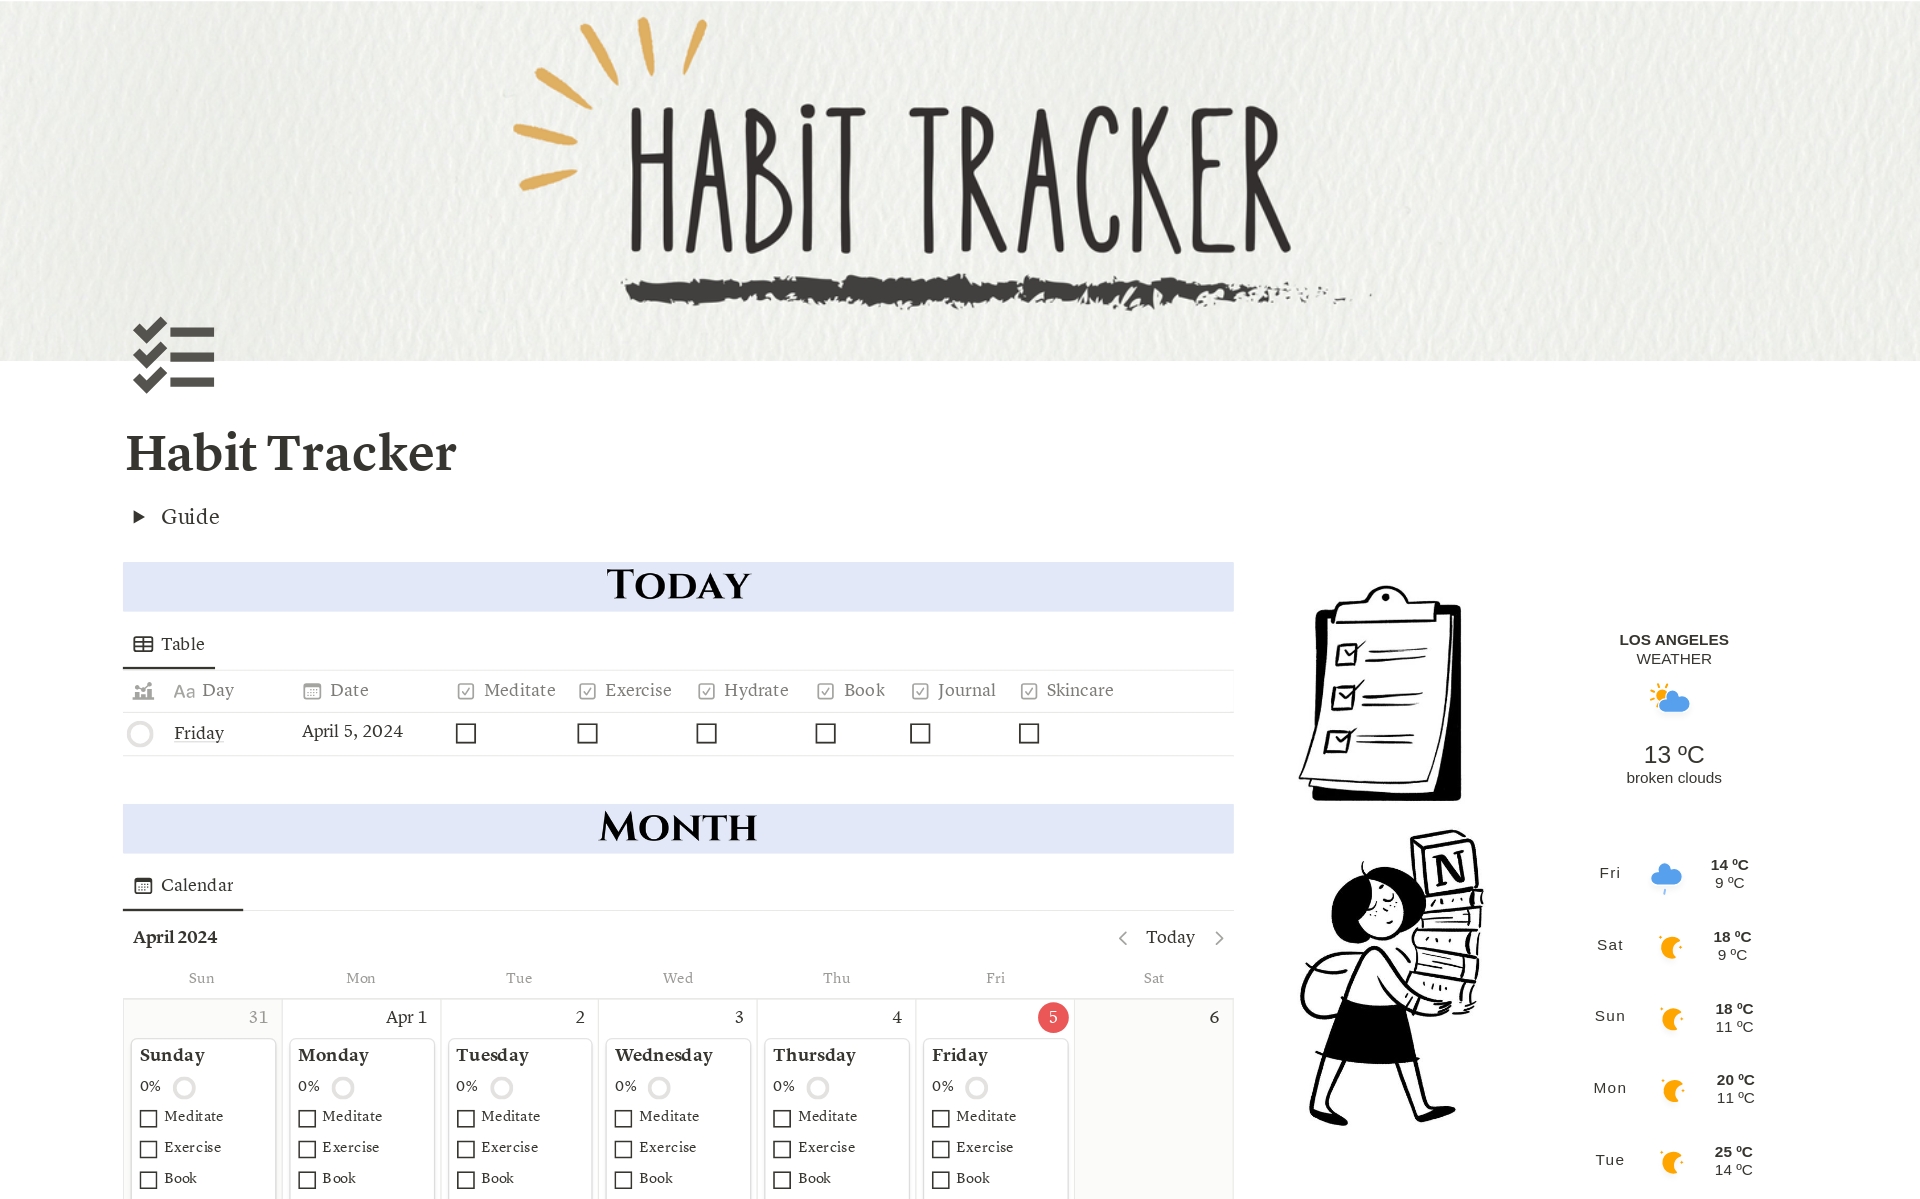 This template can unlock the potential! Track daily habits, see progress weekly & monthly. Build routines that last & finally crush your goals. Habit Tracker: Your coach in your pocket, keeping you accountable & achieving a better you!